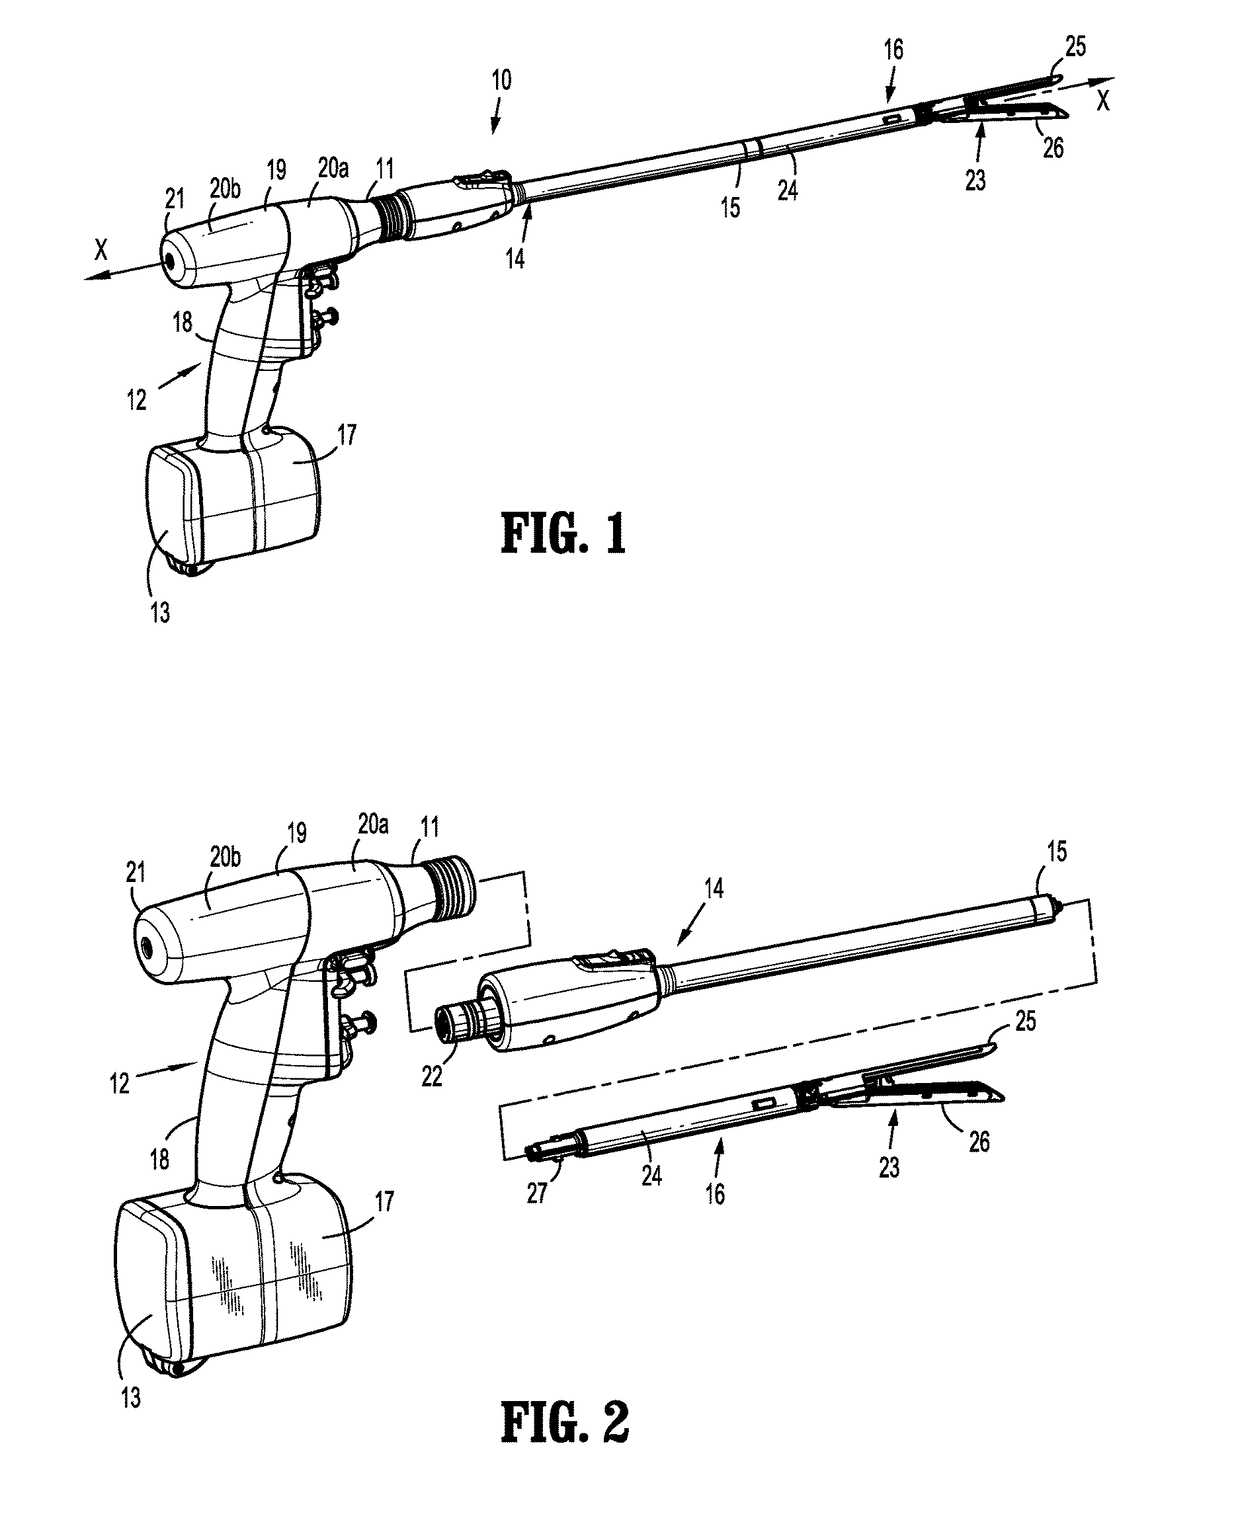 Wake-up system and method for powered surgical instruments